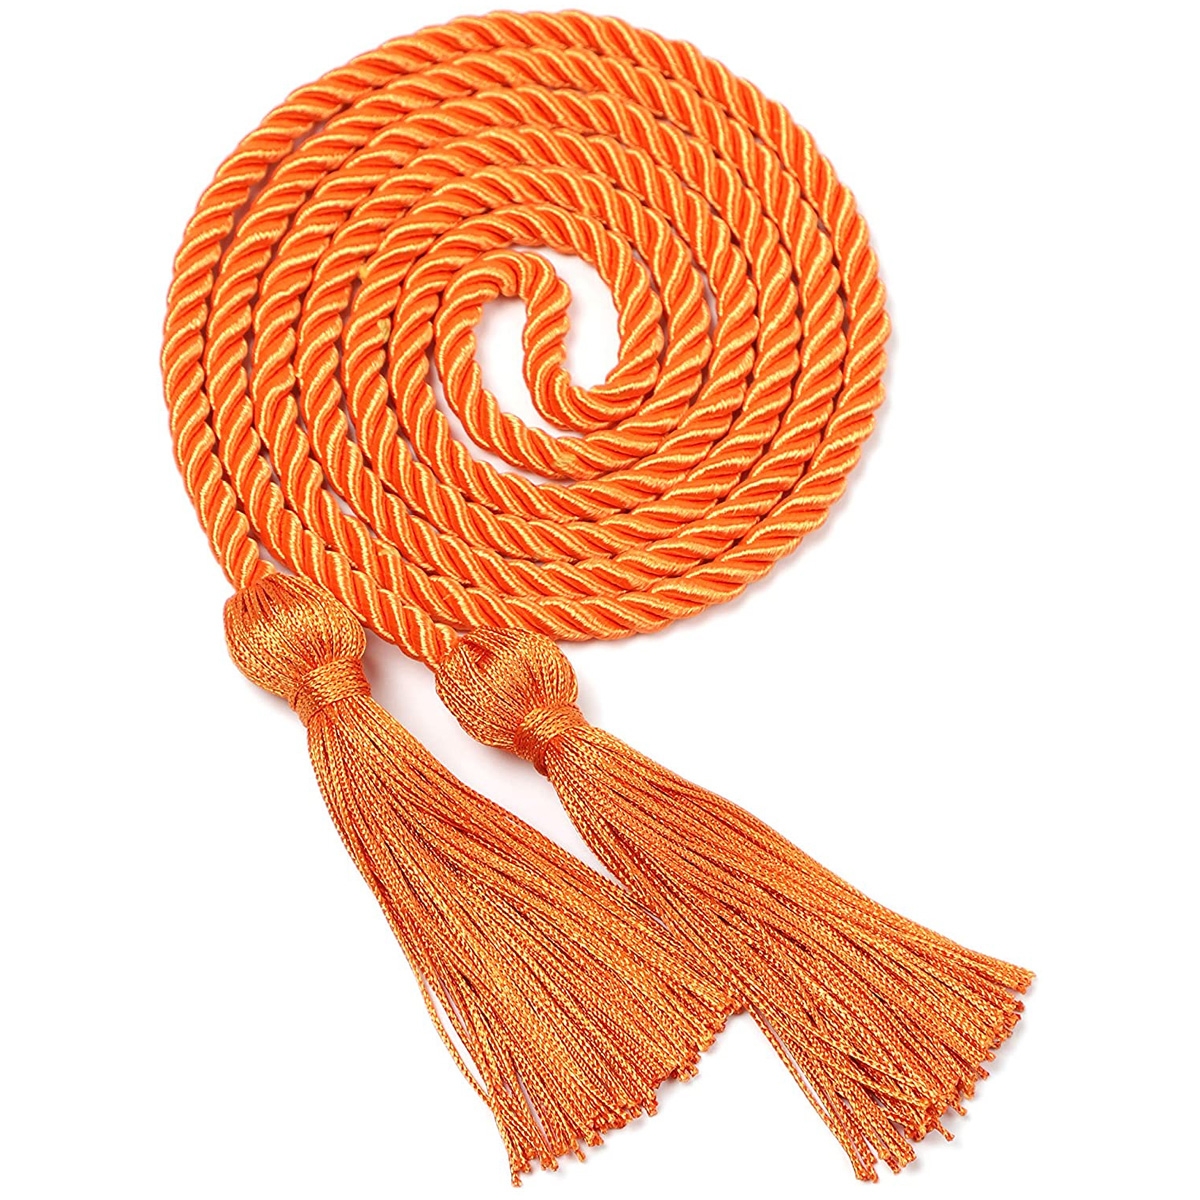 Cords Tassels Cords Polyester Yarn Honor Cord for Graduation Students 63 Inchs Long (Orange)